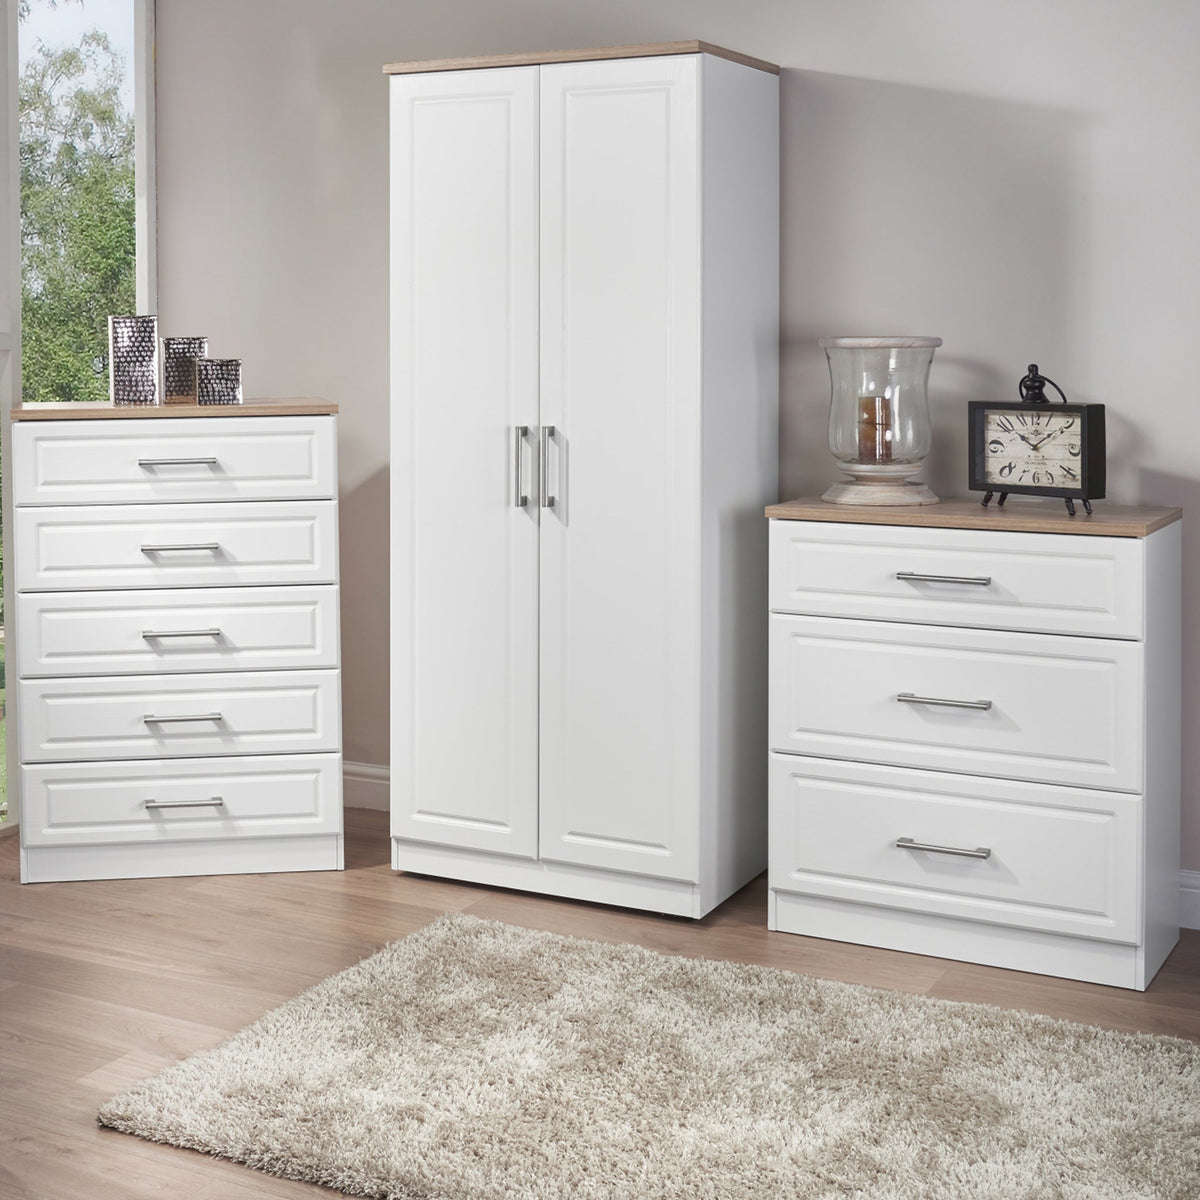 Talland White 4 Piece Bedroom Set from Roseland